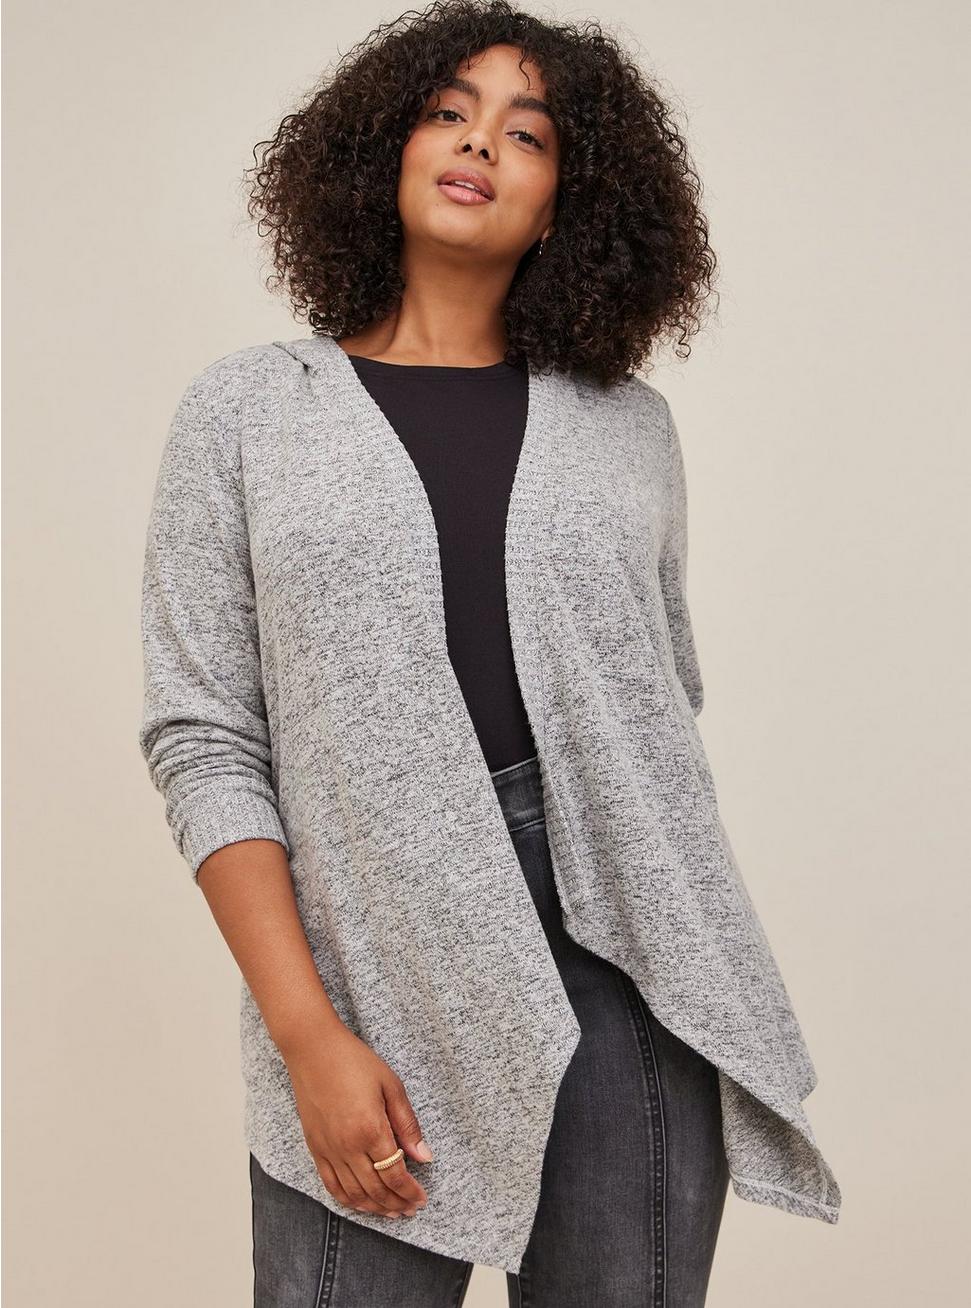 Super Soft Plush Hooded Cardigan Open Front, HEATHER GREY, hi-res